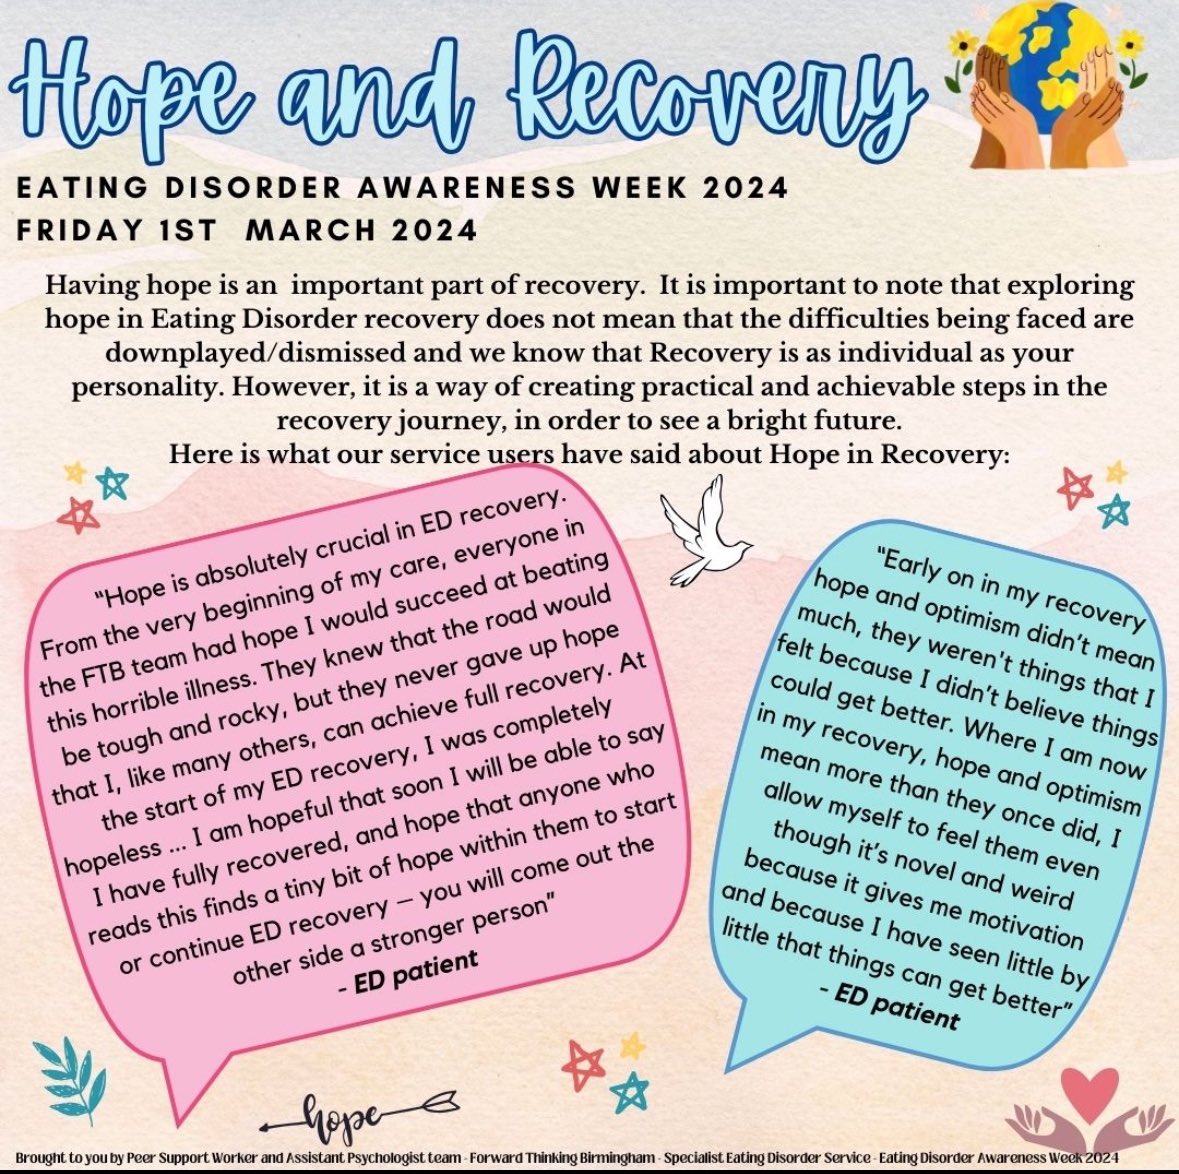 Final #EDAW2024 day 4us @BWC_NHS SEDS but we know this is about putting in the work beyond awareness weeks 2keep learning & innovating 2ensure access 2effective treatment 4all.  Ending the week with our constant motivation & inspiration-the transformative power of recovery & hope